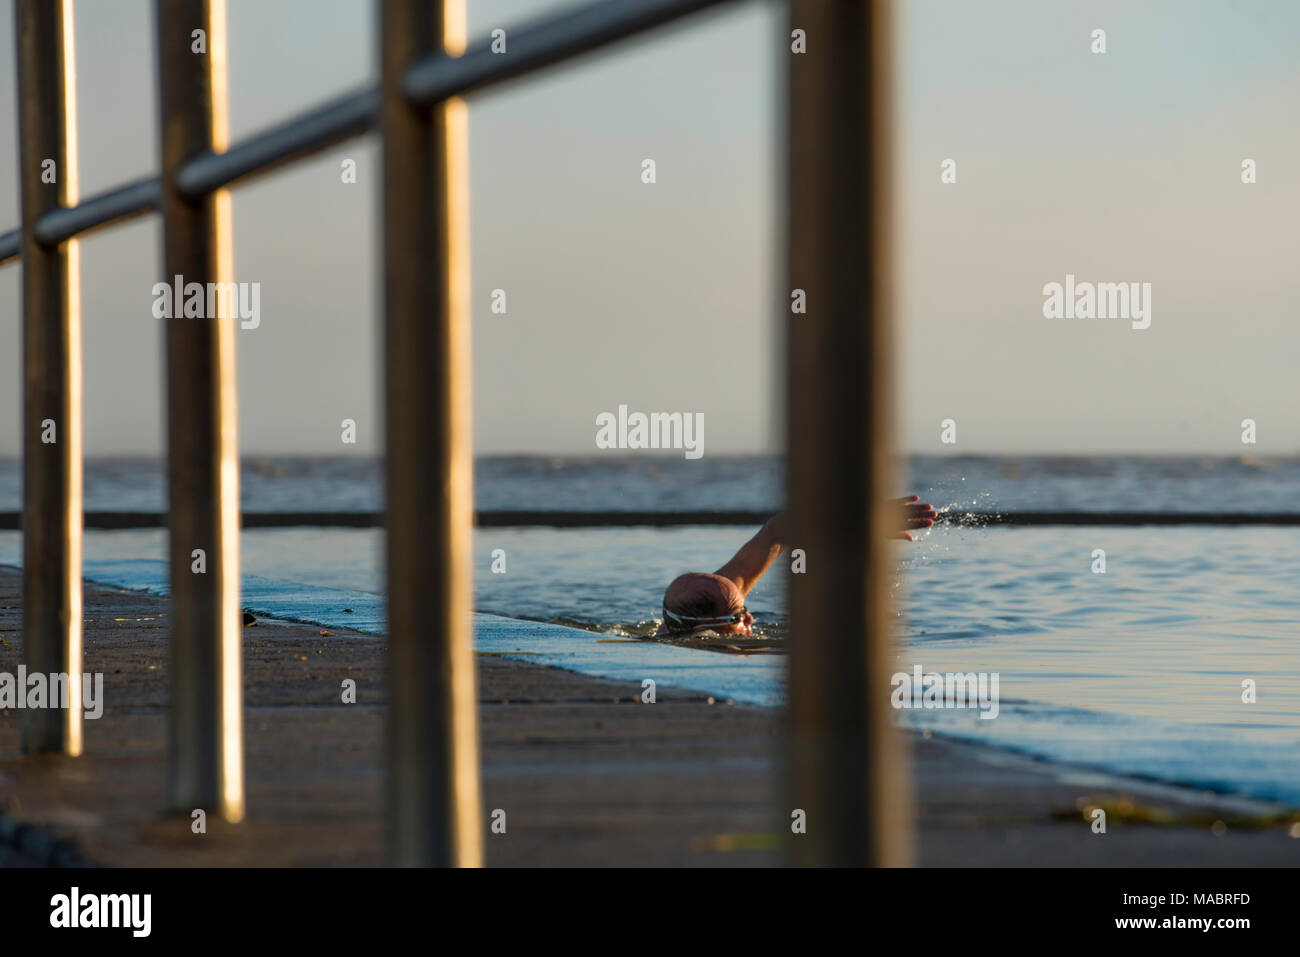 A man is swimming in a large ocean pool just on dawn at Forster on the mid north coast of New South Wales, Australia. Shot through a hand rail. Stock Photo